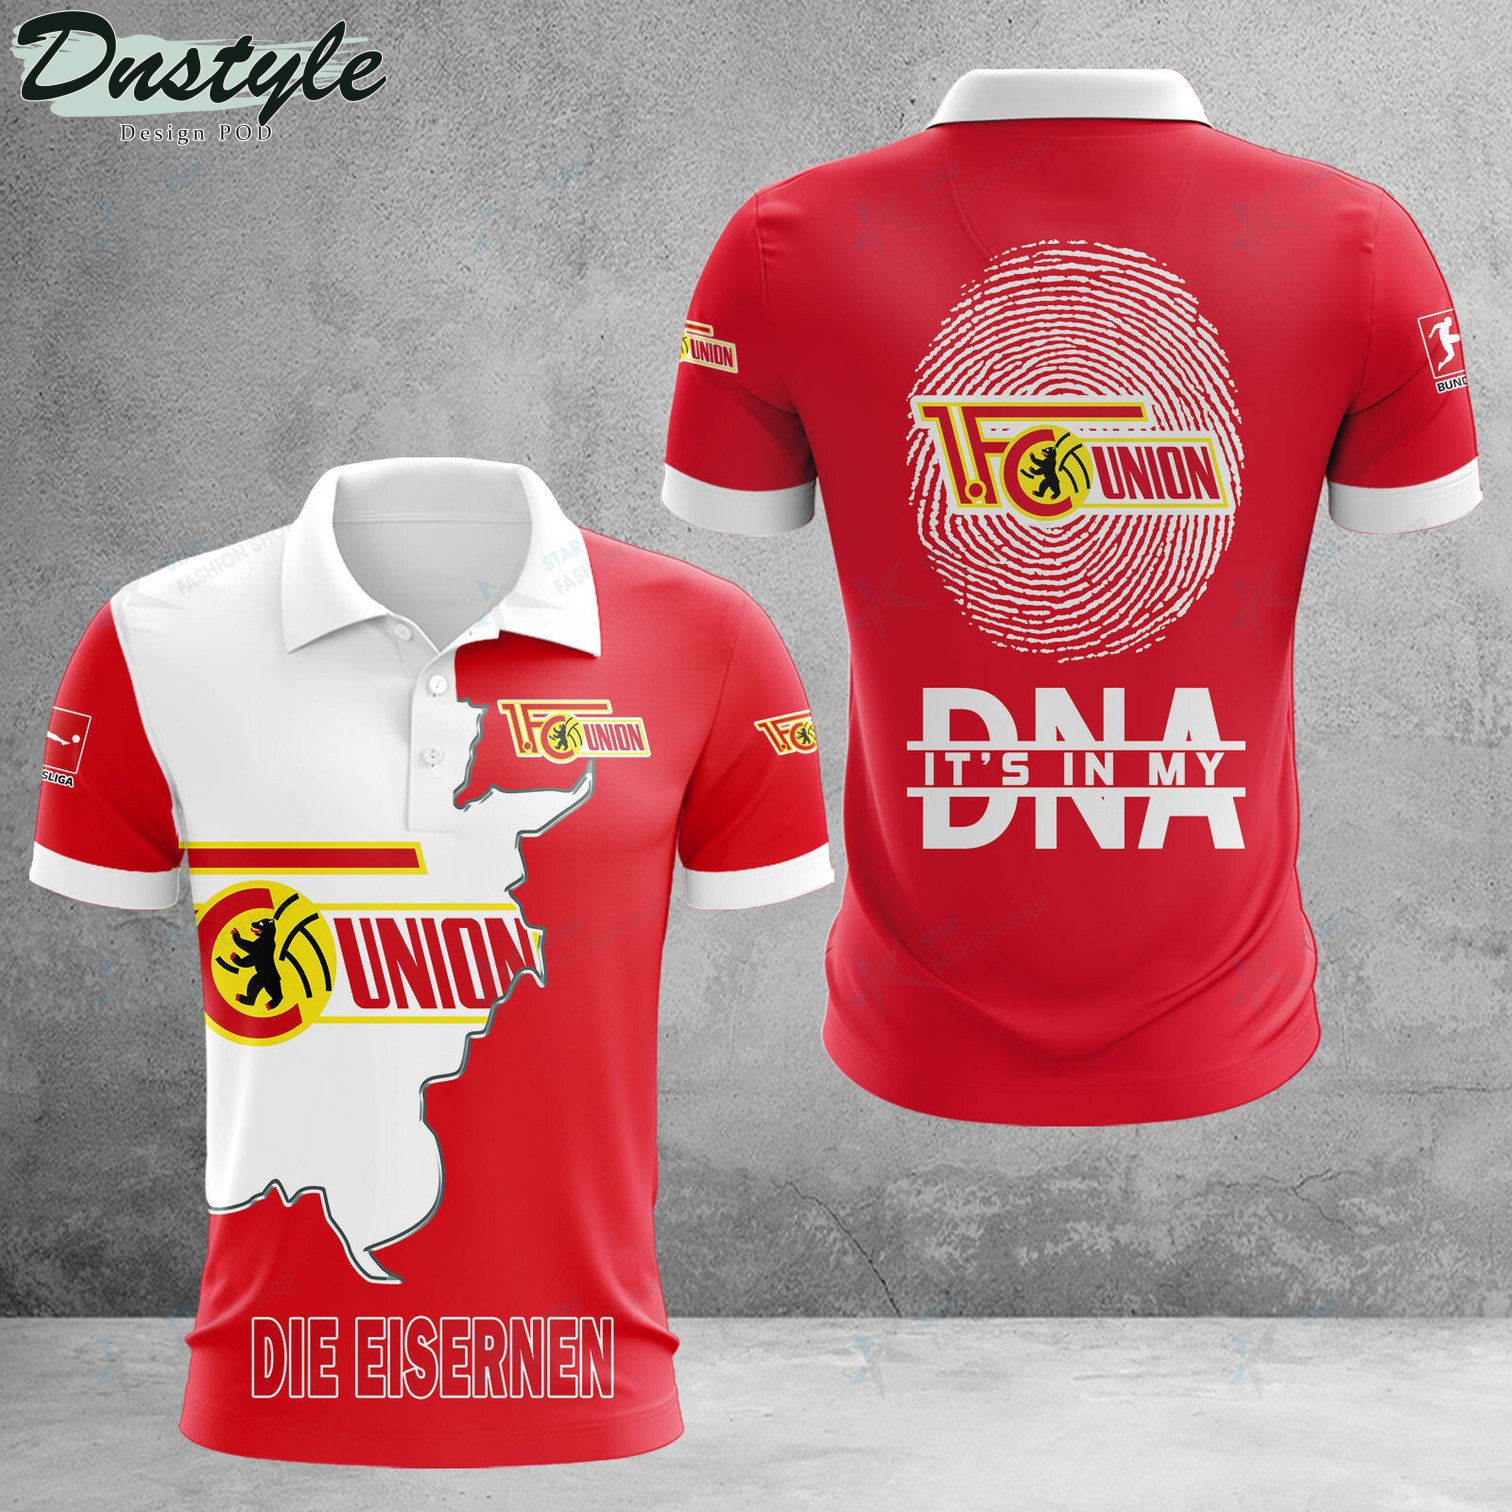 Union Berlin it's in my DNA polo shirt